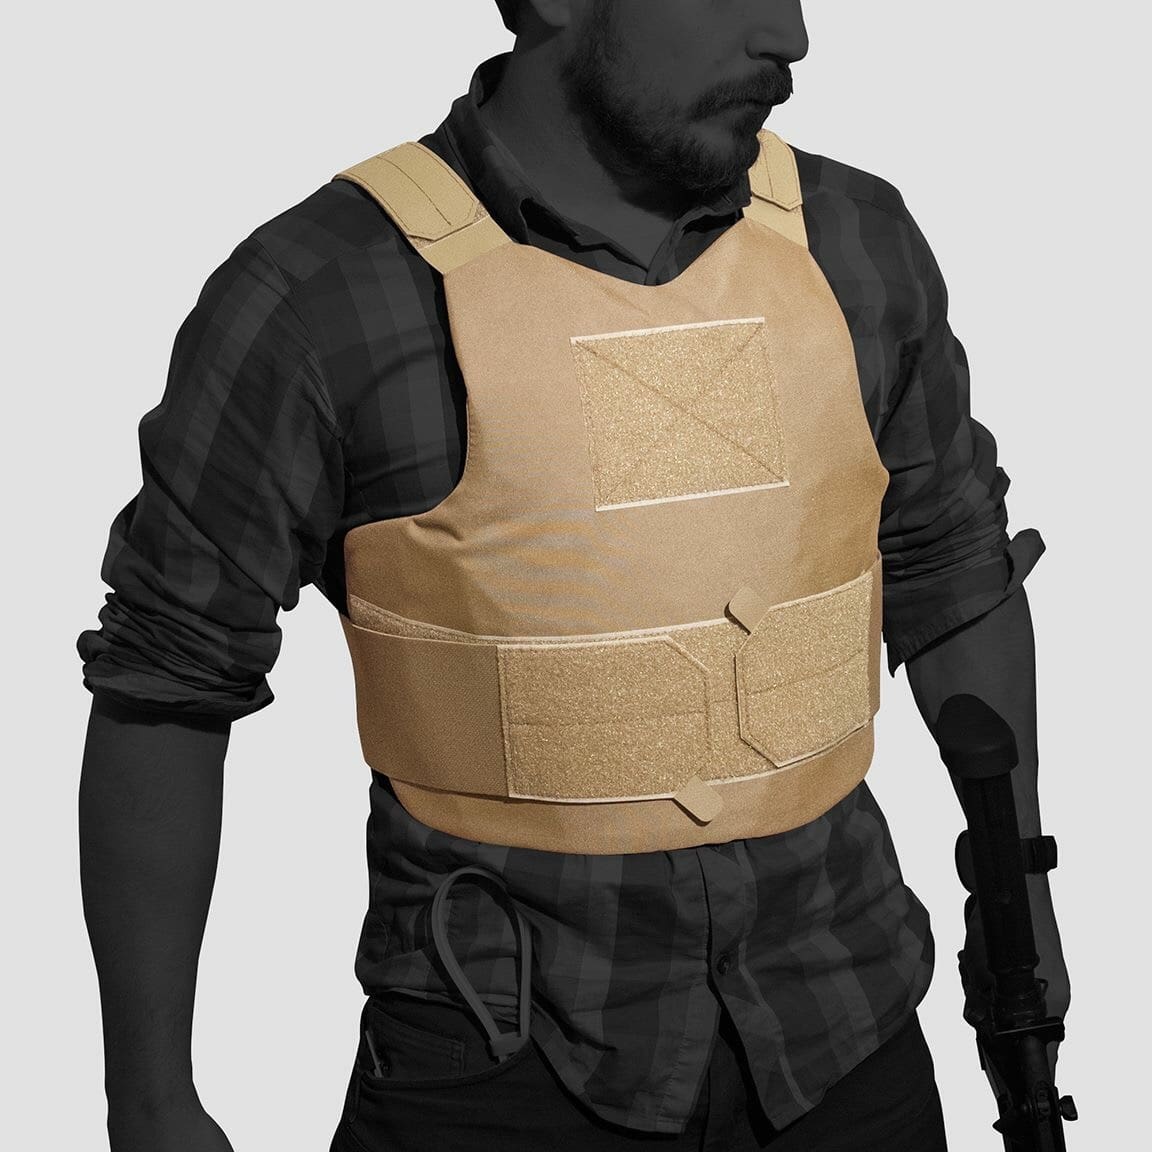 Best Body Armor To Be Worn Under Clothes